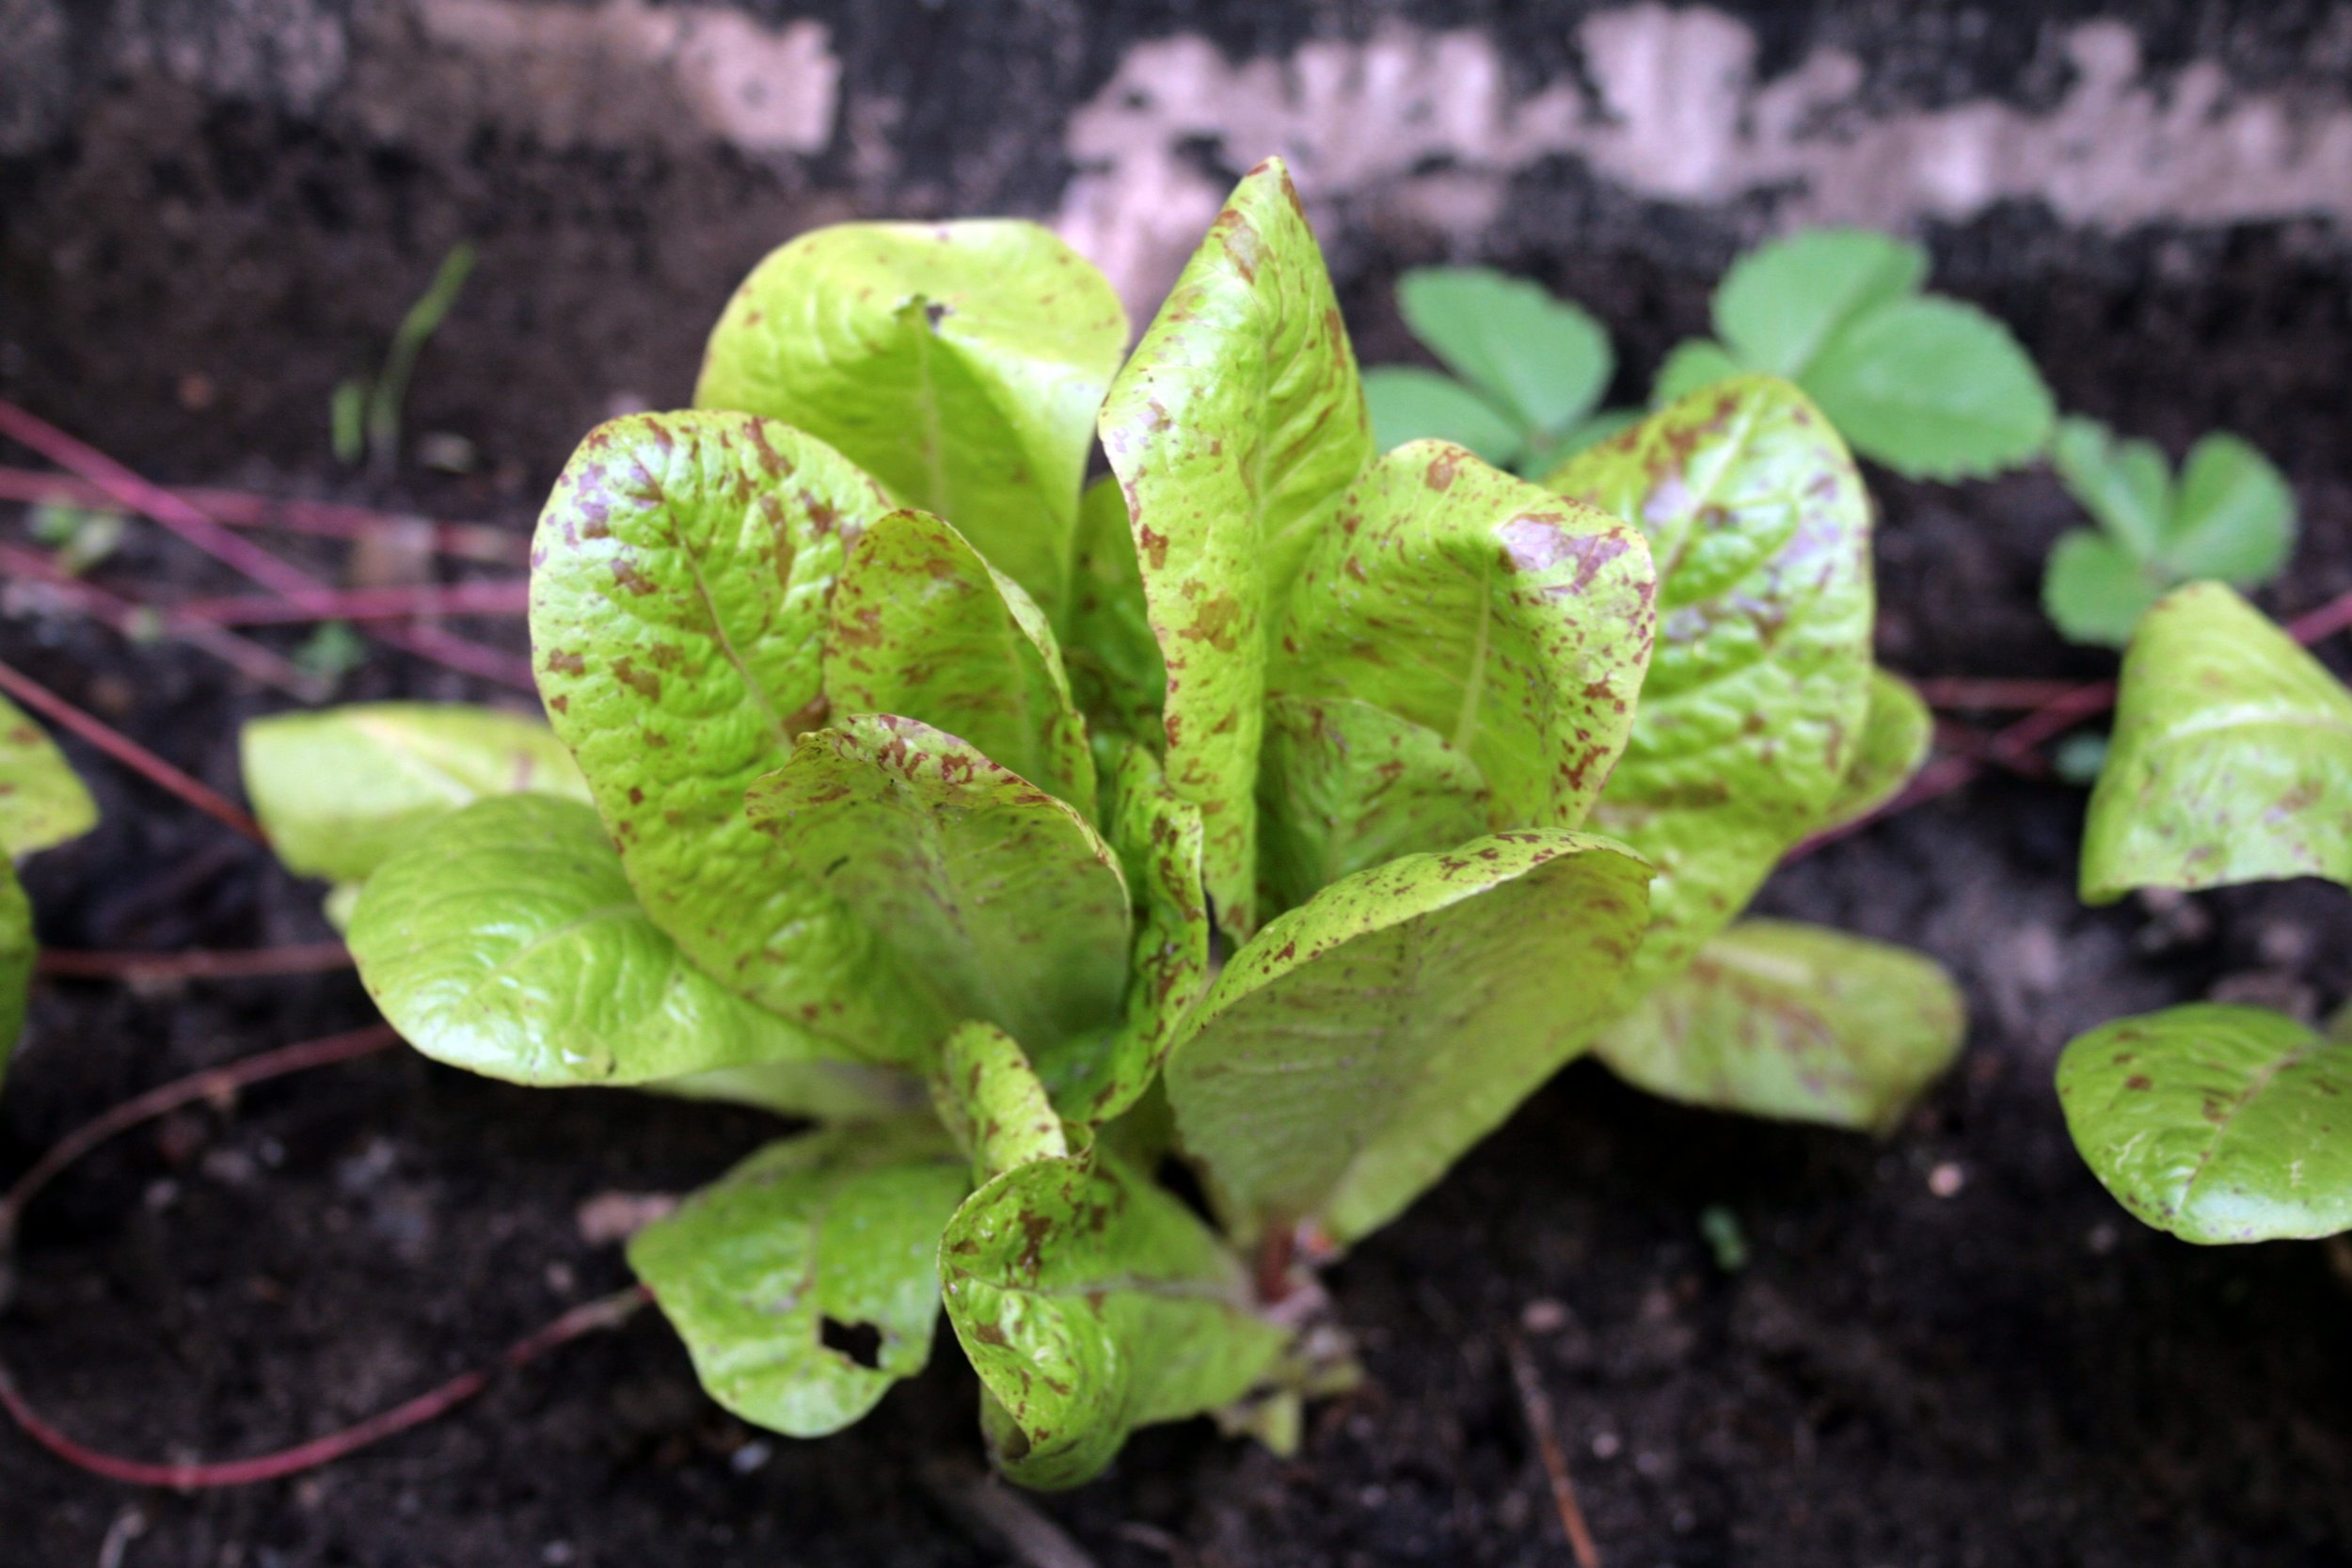 'Freckle Face' Lettuce From Last Year's Garden